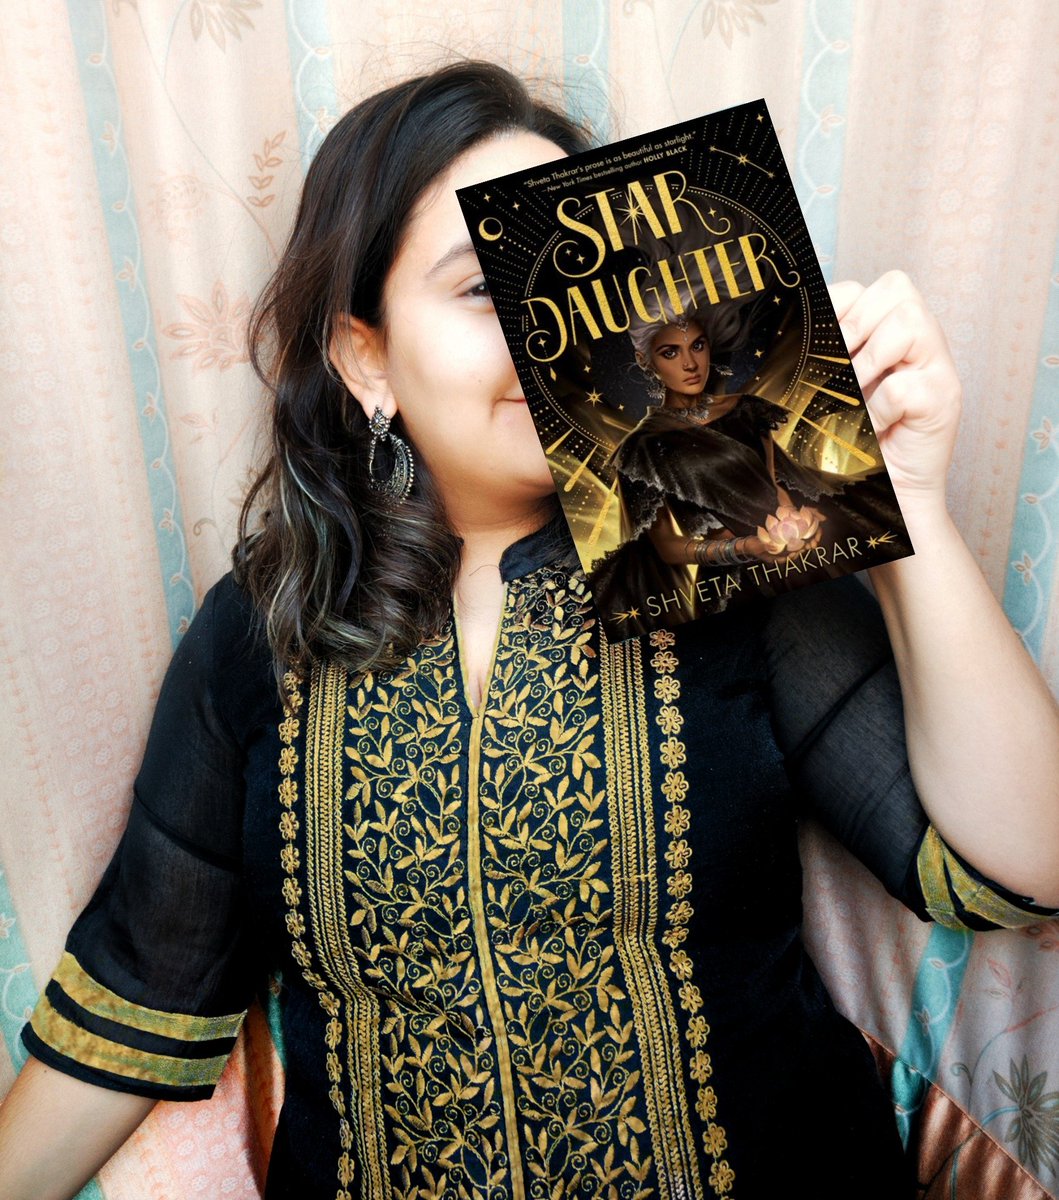  Day 21 When I first saw Star Daughter by  @ShvetaThakrar the cover absolutely blew me away  I can't wait to get my hands on a copy but until then, I can always dress up as the book   #AsianHeritageMonth  